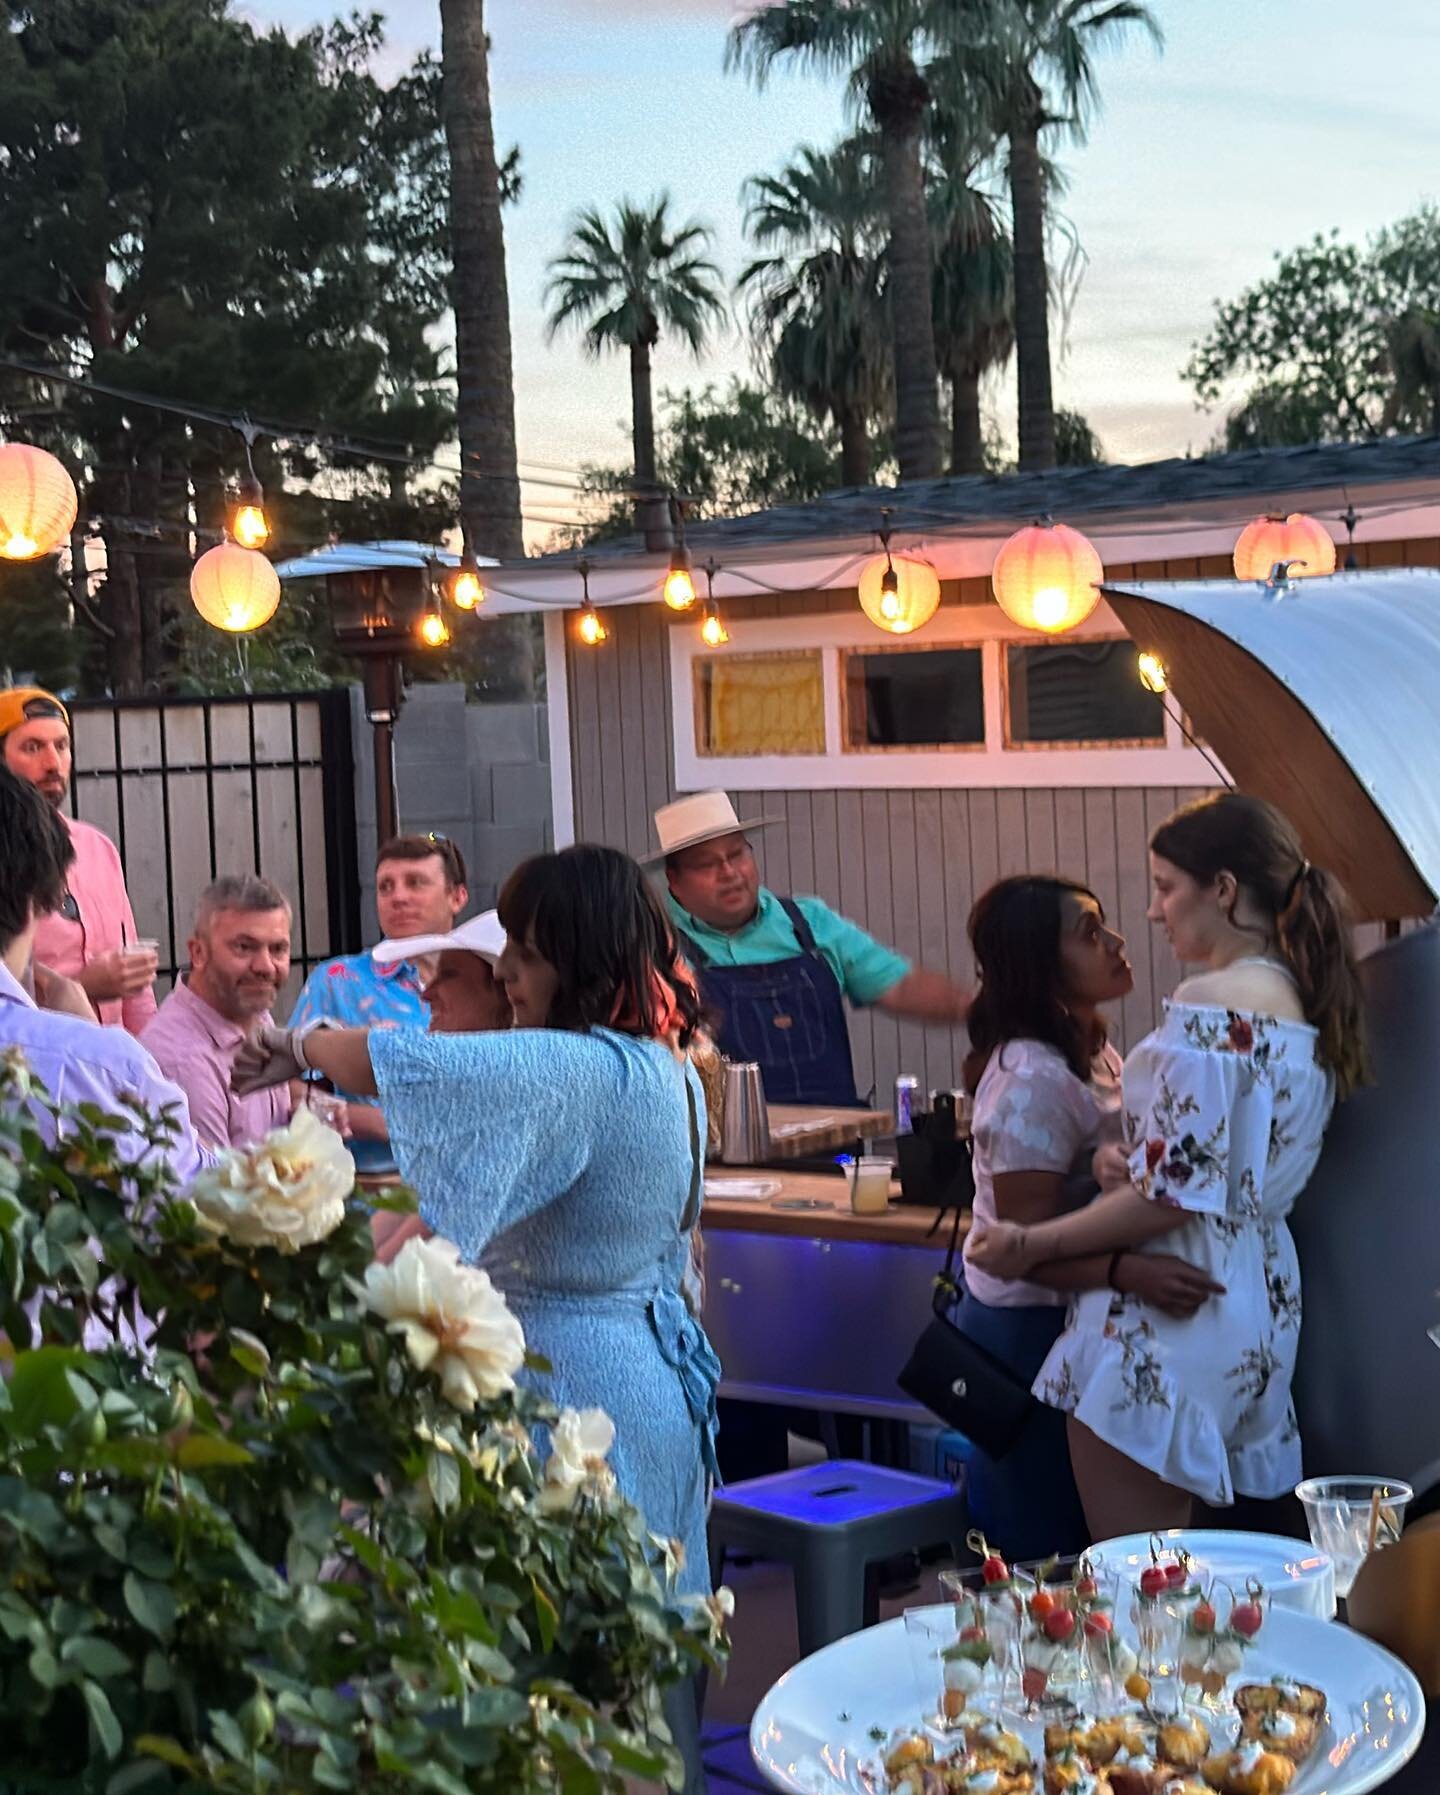 A fun @azyardbar event! This event was an impromptu retirement party. Garden parties never disappoint this time of year 🌵 ☀️ 🌸 @yourdomestique  #scottsdaleliving #arcadia #mobilebar #vintagetrailers #airstream #speakeasybar